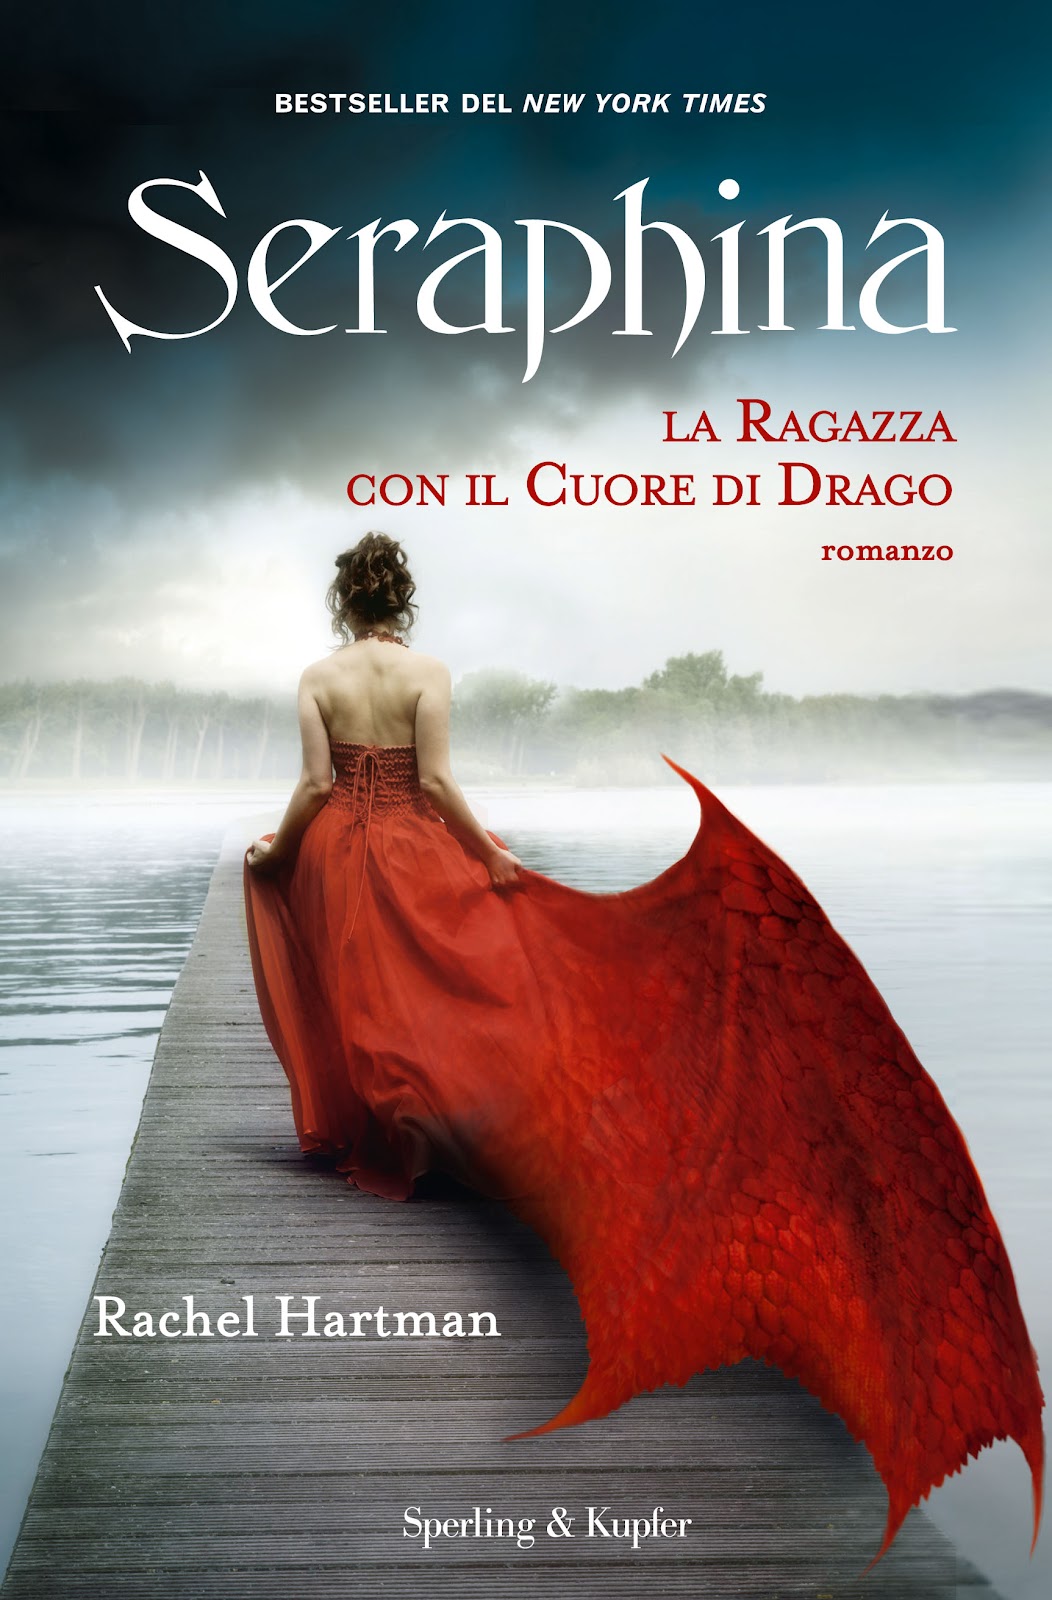 More about Seraphina